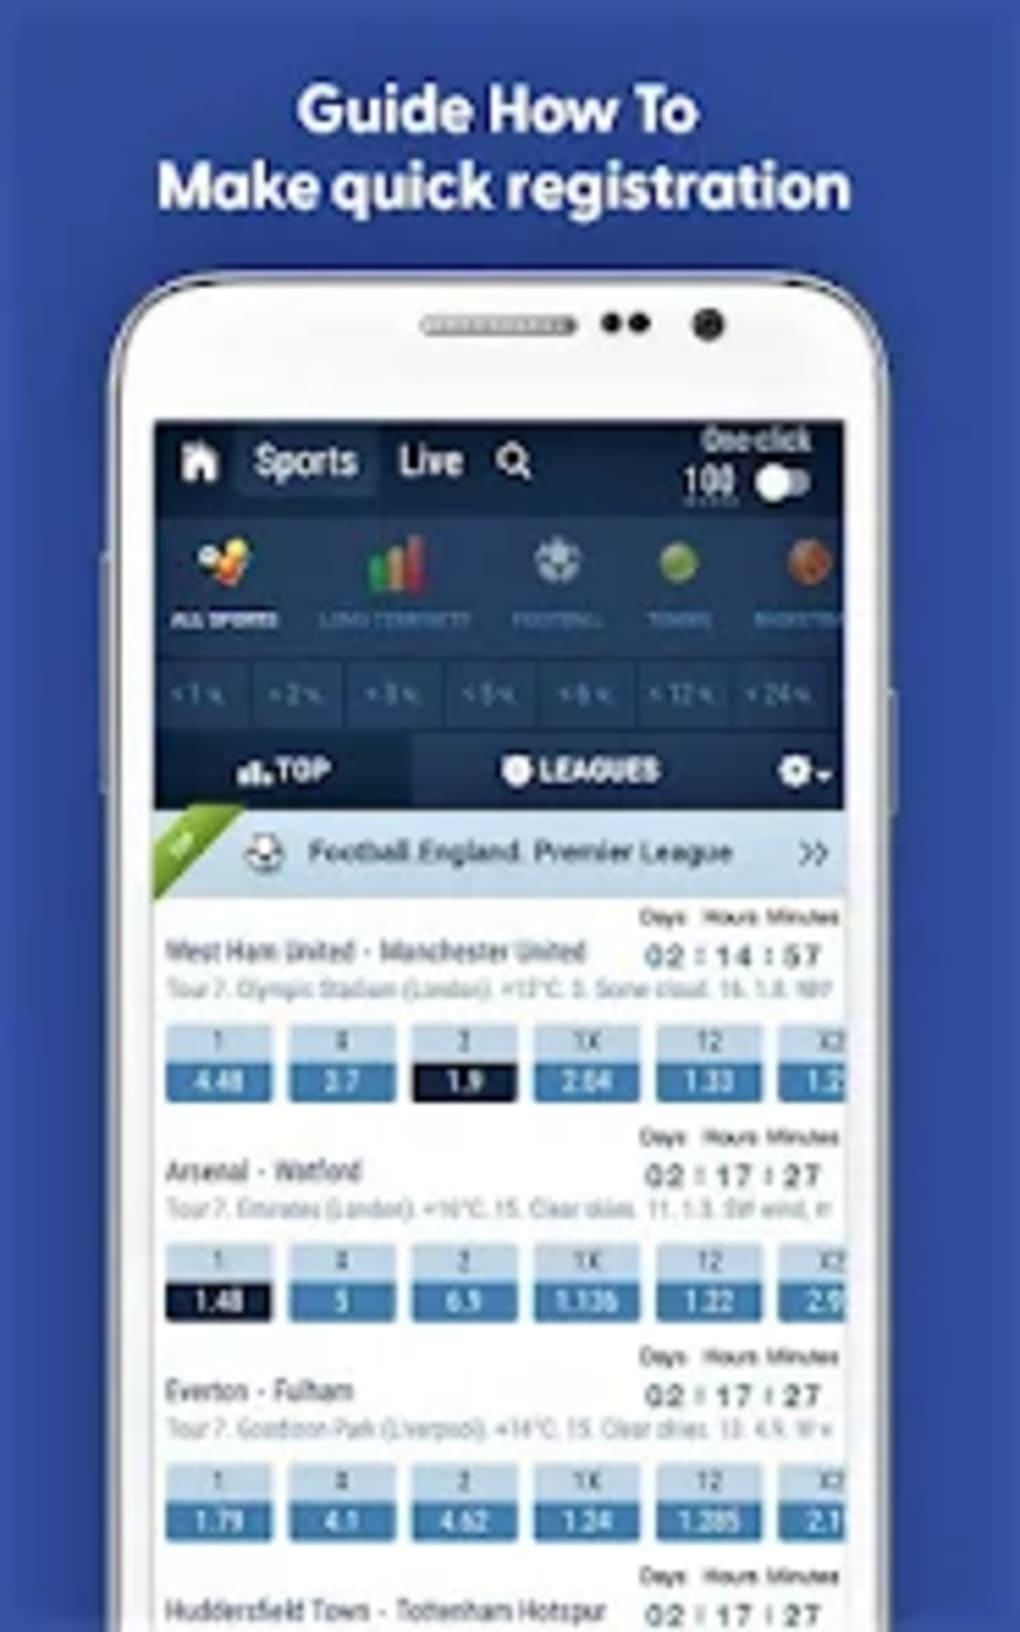 Don't Waste Time! 5 Facts To Start 1xbet partenaire apk download